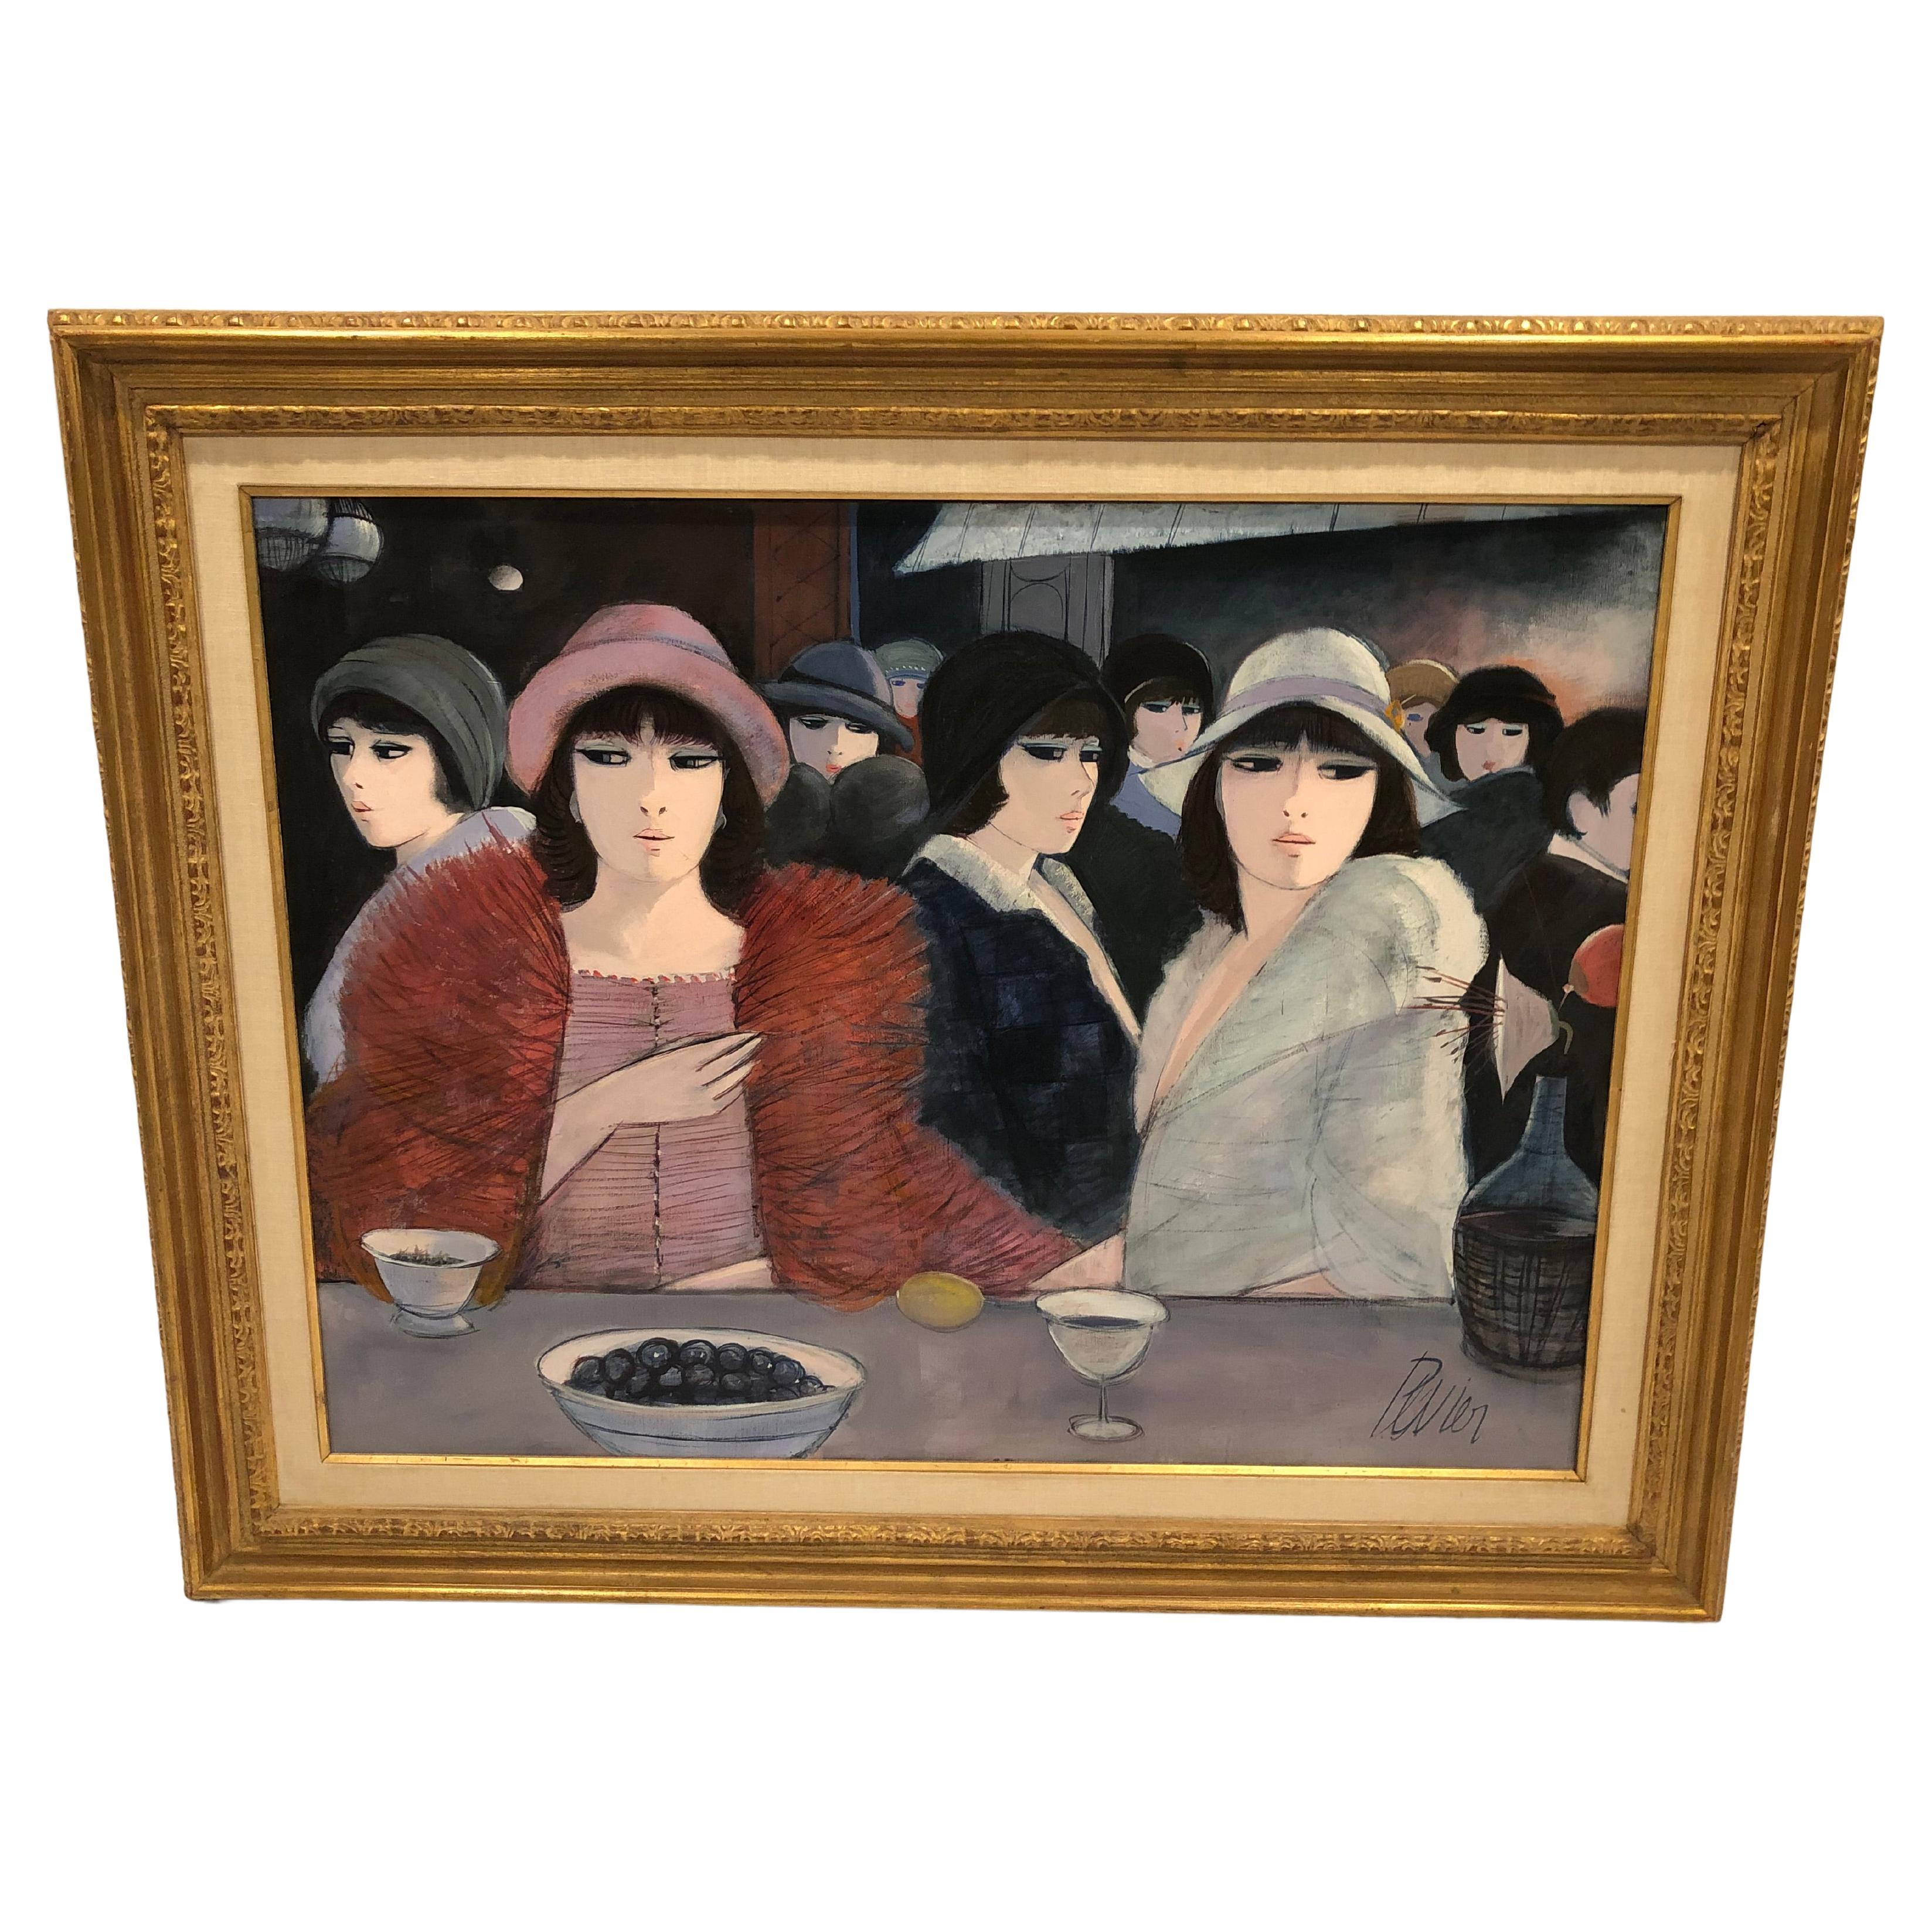 Bold Stylized Painting by Charles Levier of Fashionable French Women in Hats